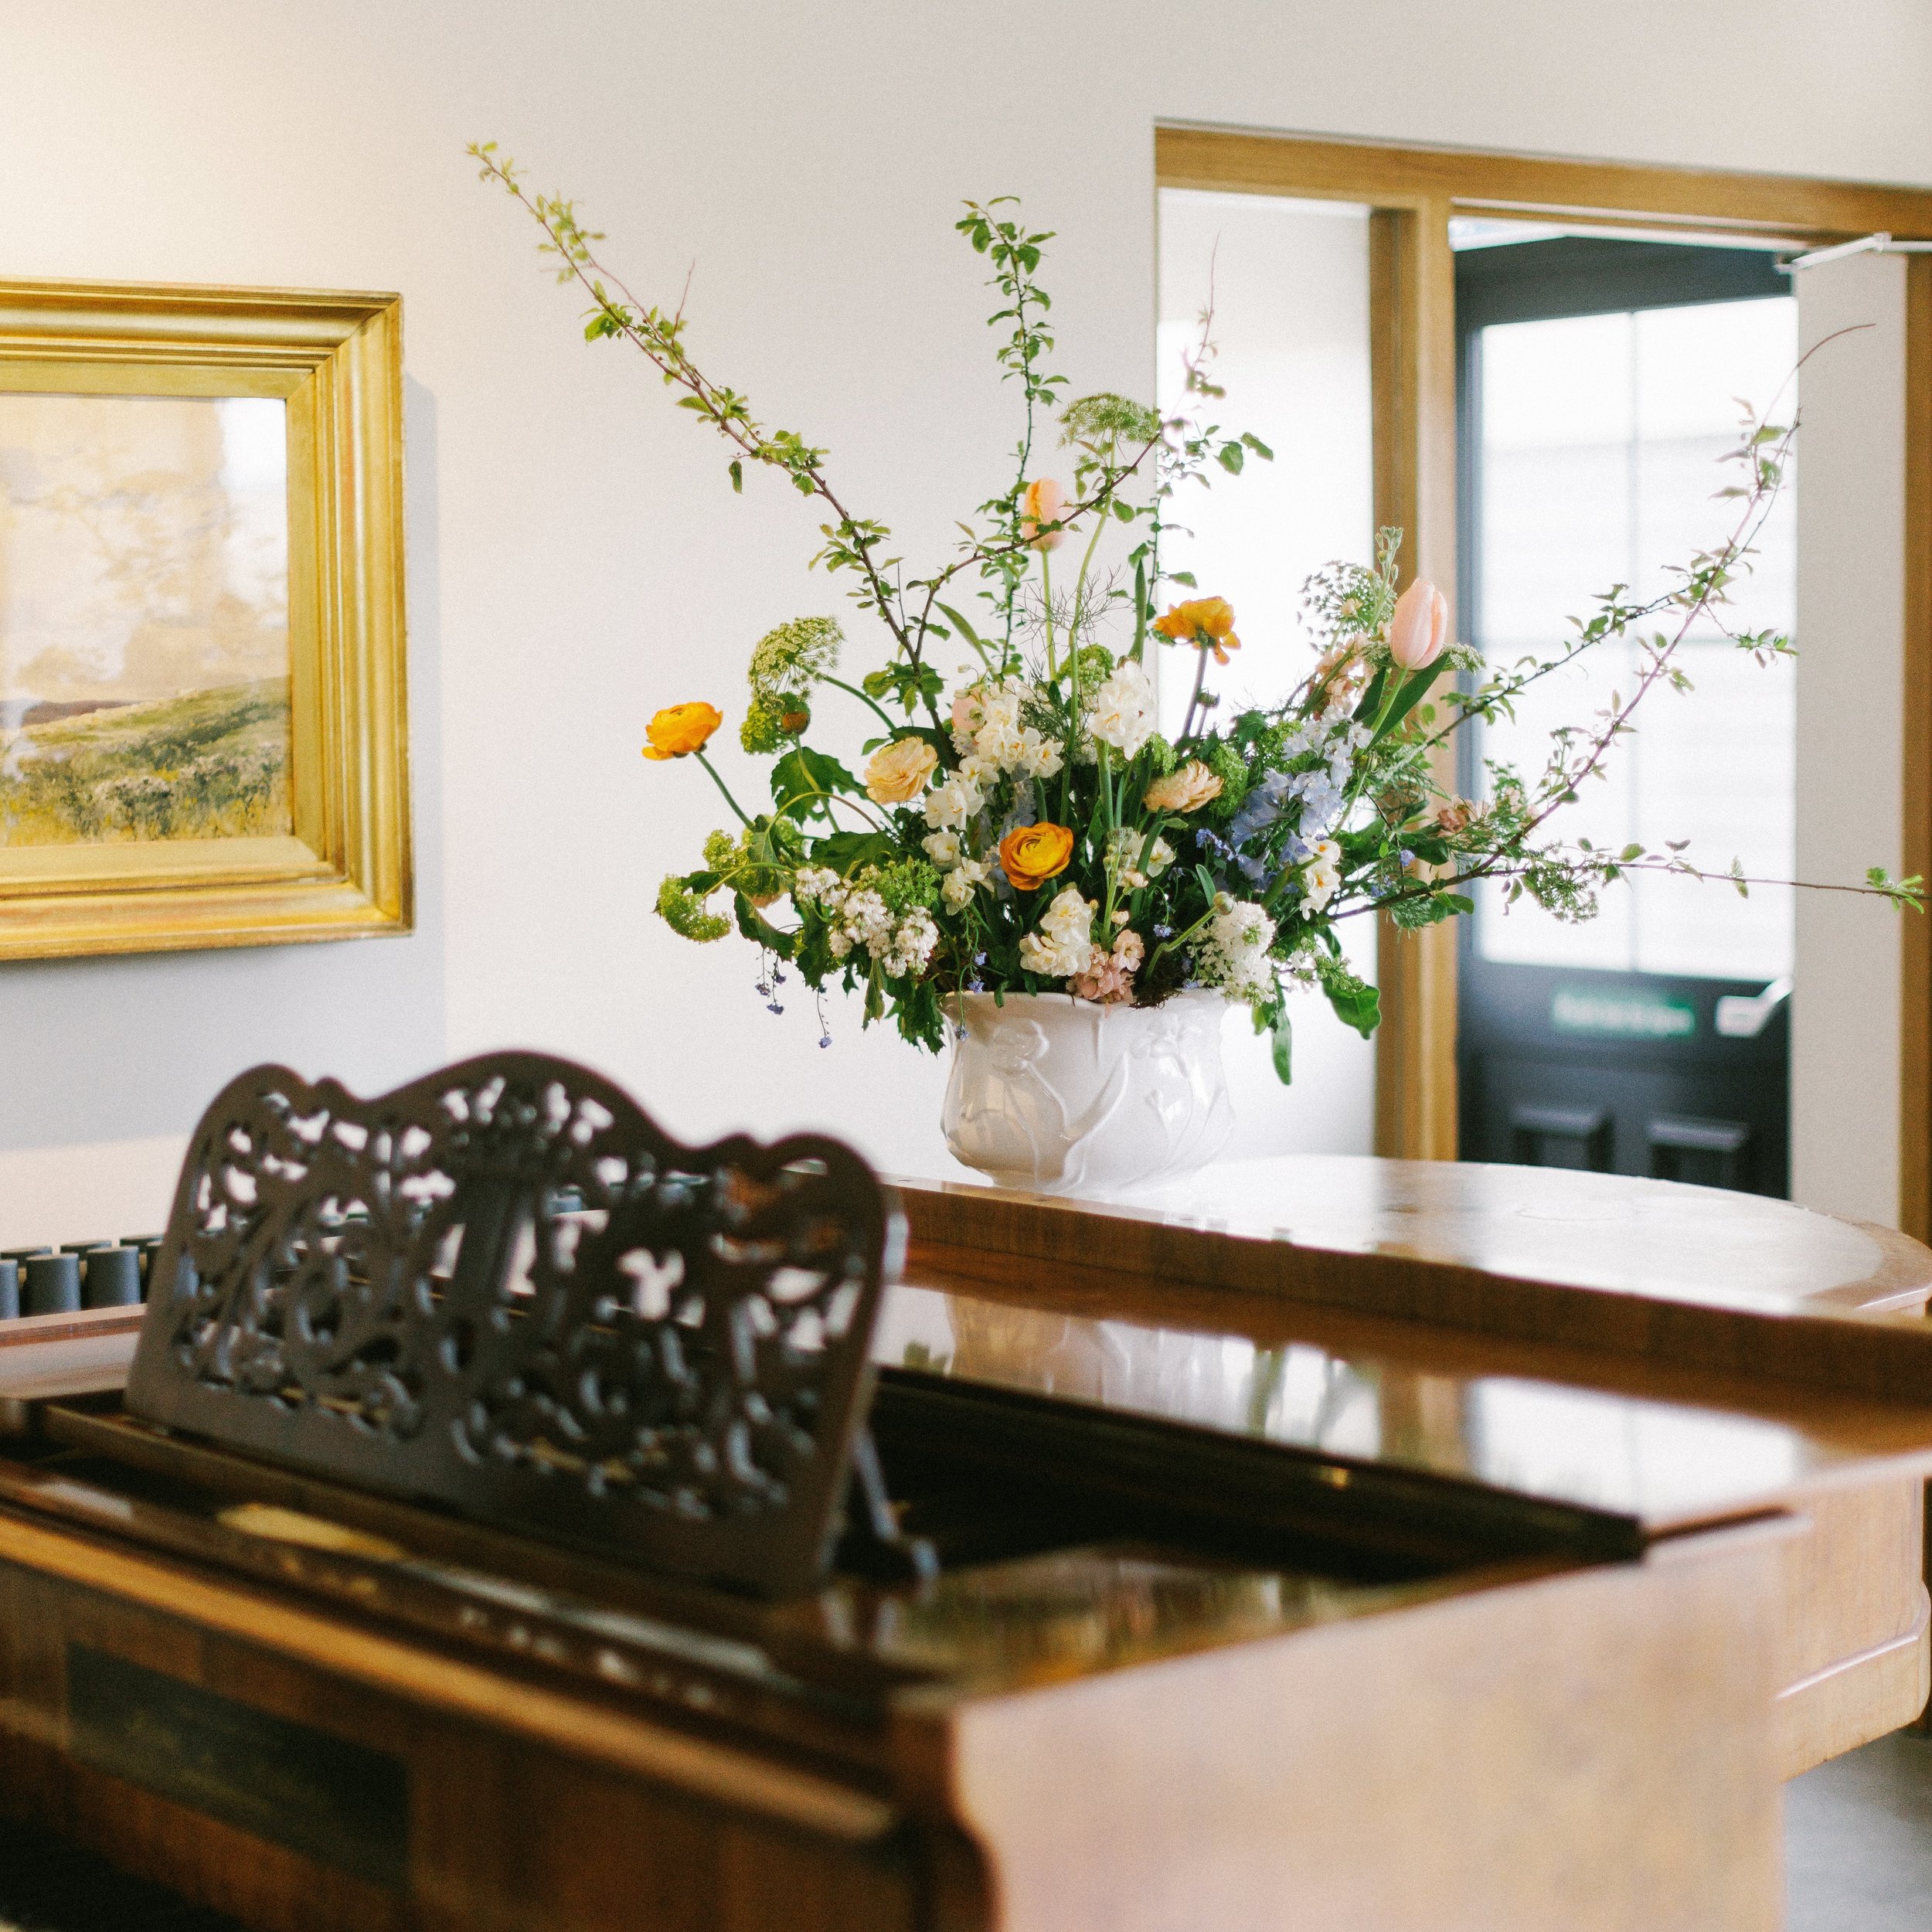 What a wonderful way to start the week with a Home Tour feature on @cocoweddingvenues ✨
Follow the link in our bio to read all about it!